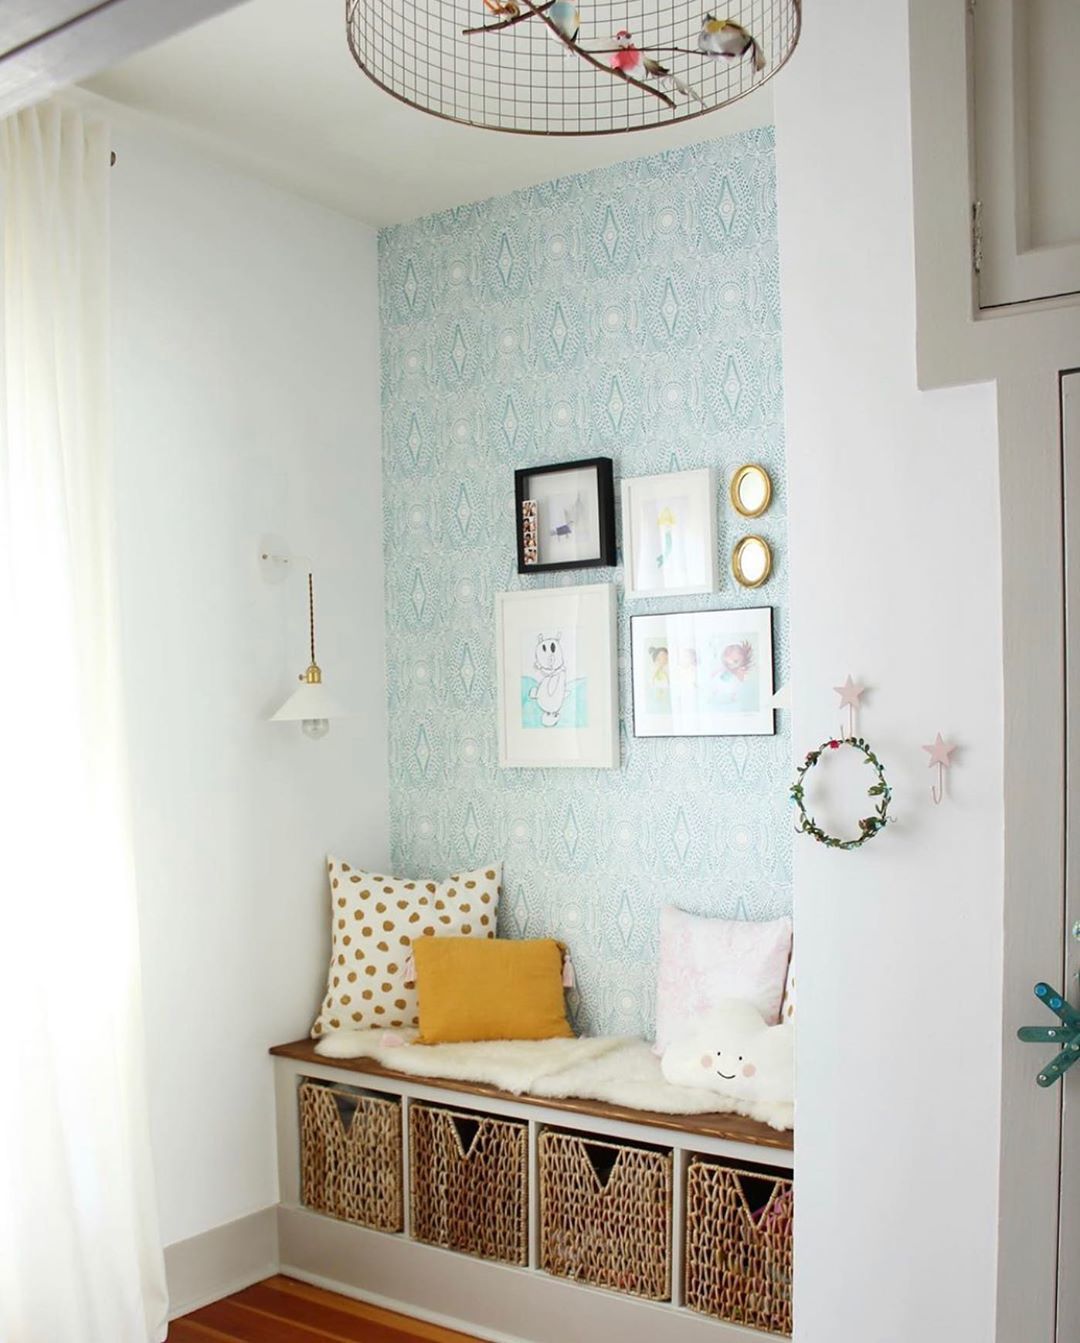 Wallpapered Nooks Roundup | Diamante Turquoise wallpaper | Laundry Studio | Hygge & West